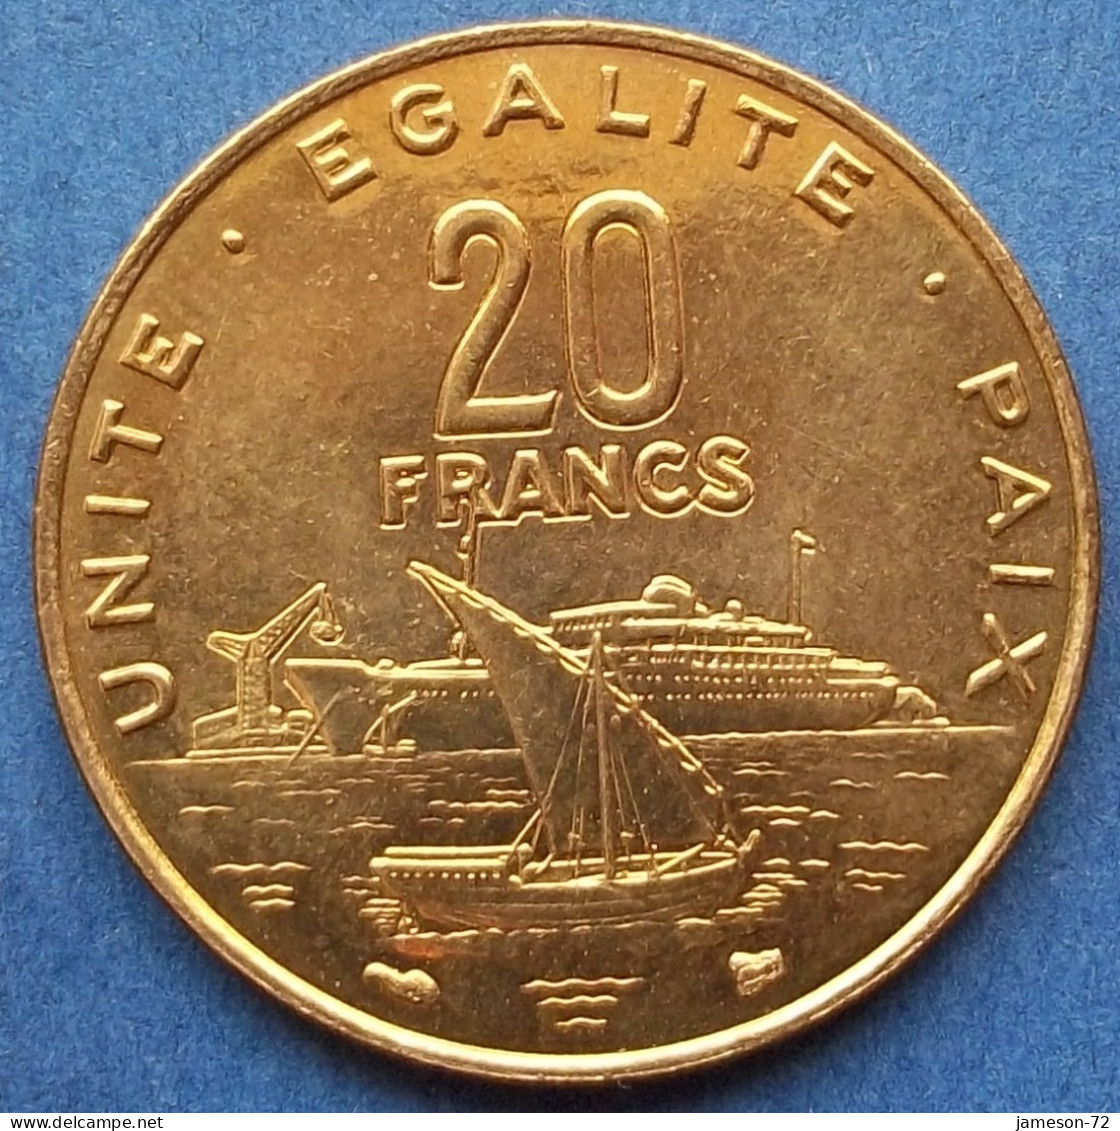 DJIBOUTI - 20 Francs 1999 "Boats On Water" KM# 24 Republic, Standard Coinage - Edelweiss Coins - Djibouti